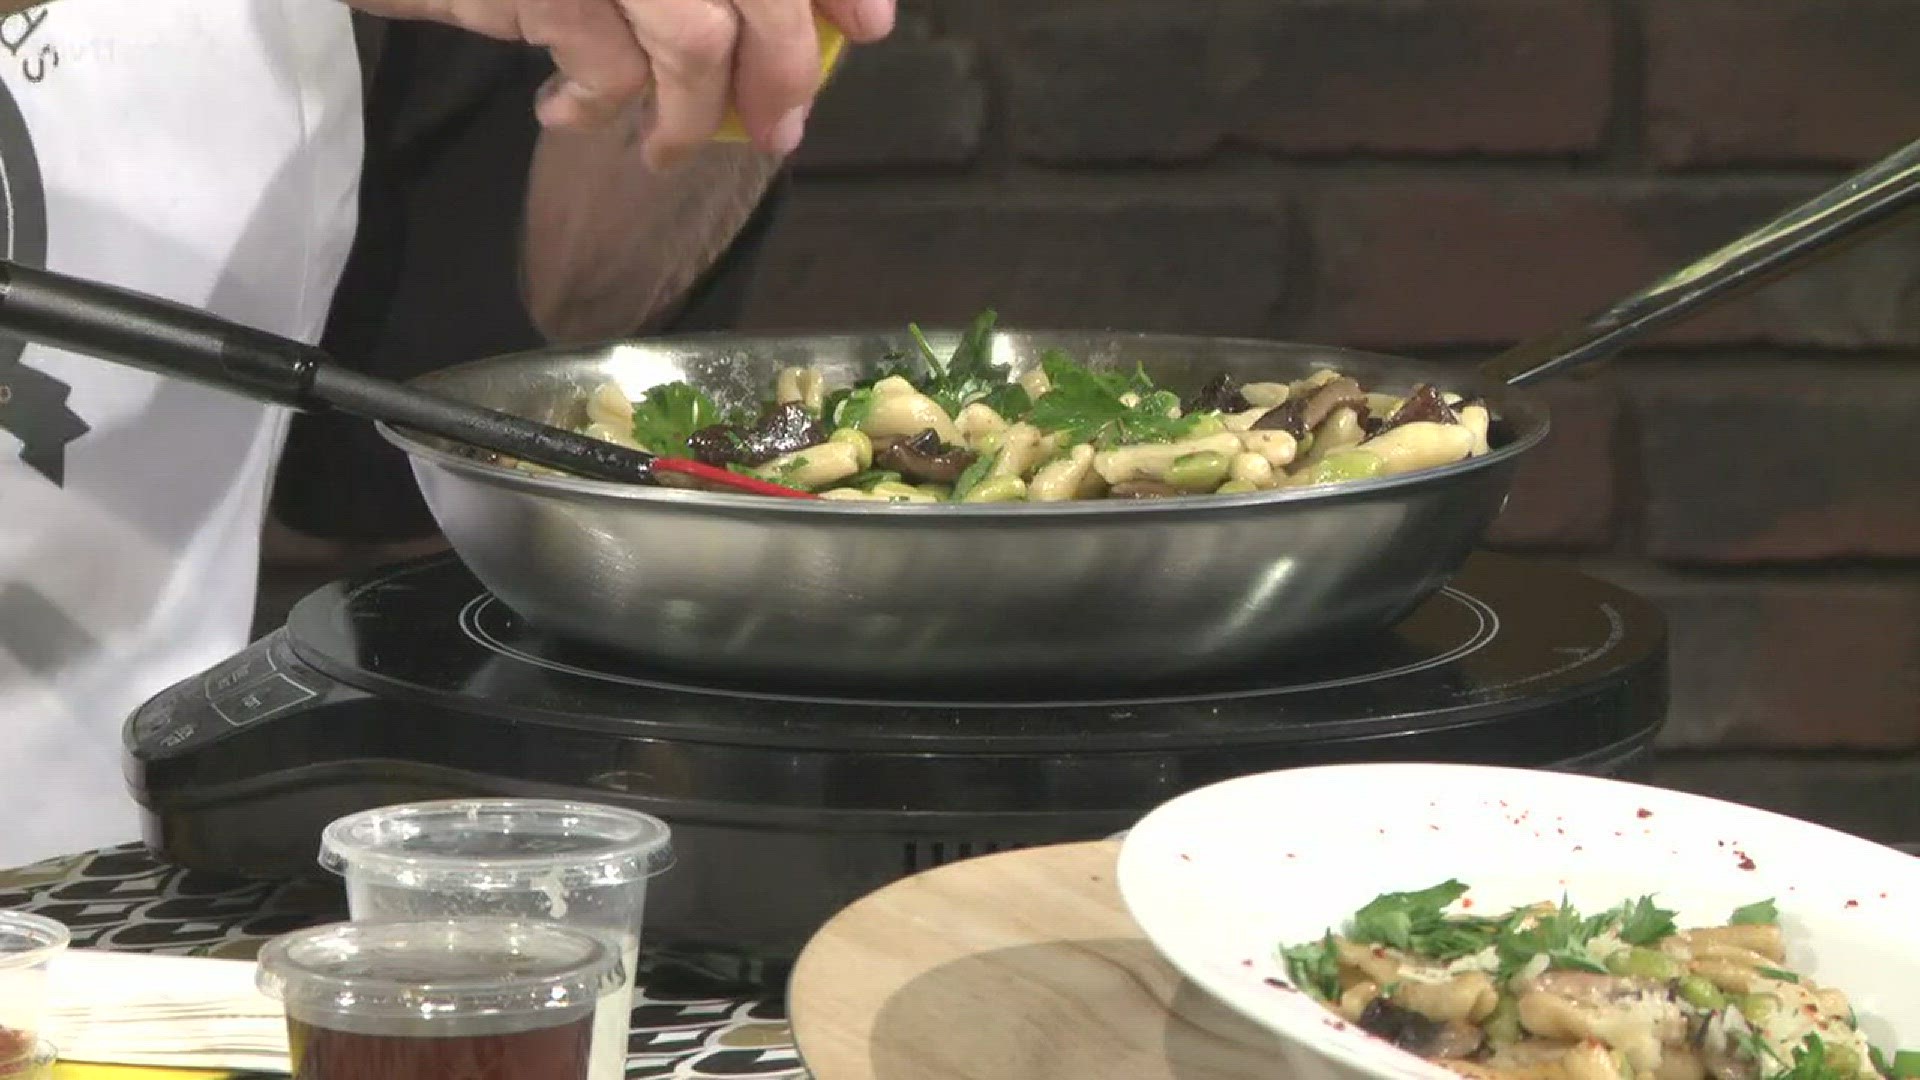 Food blogger Debbie Arnold joined THV11 This Morning with a special featured recipe from executive chef Matt McClure.